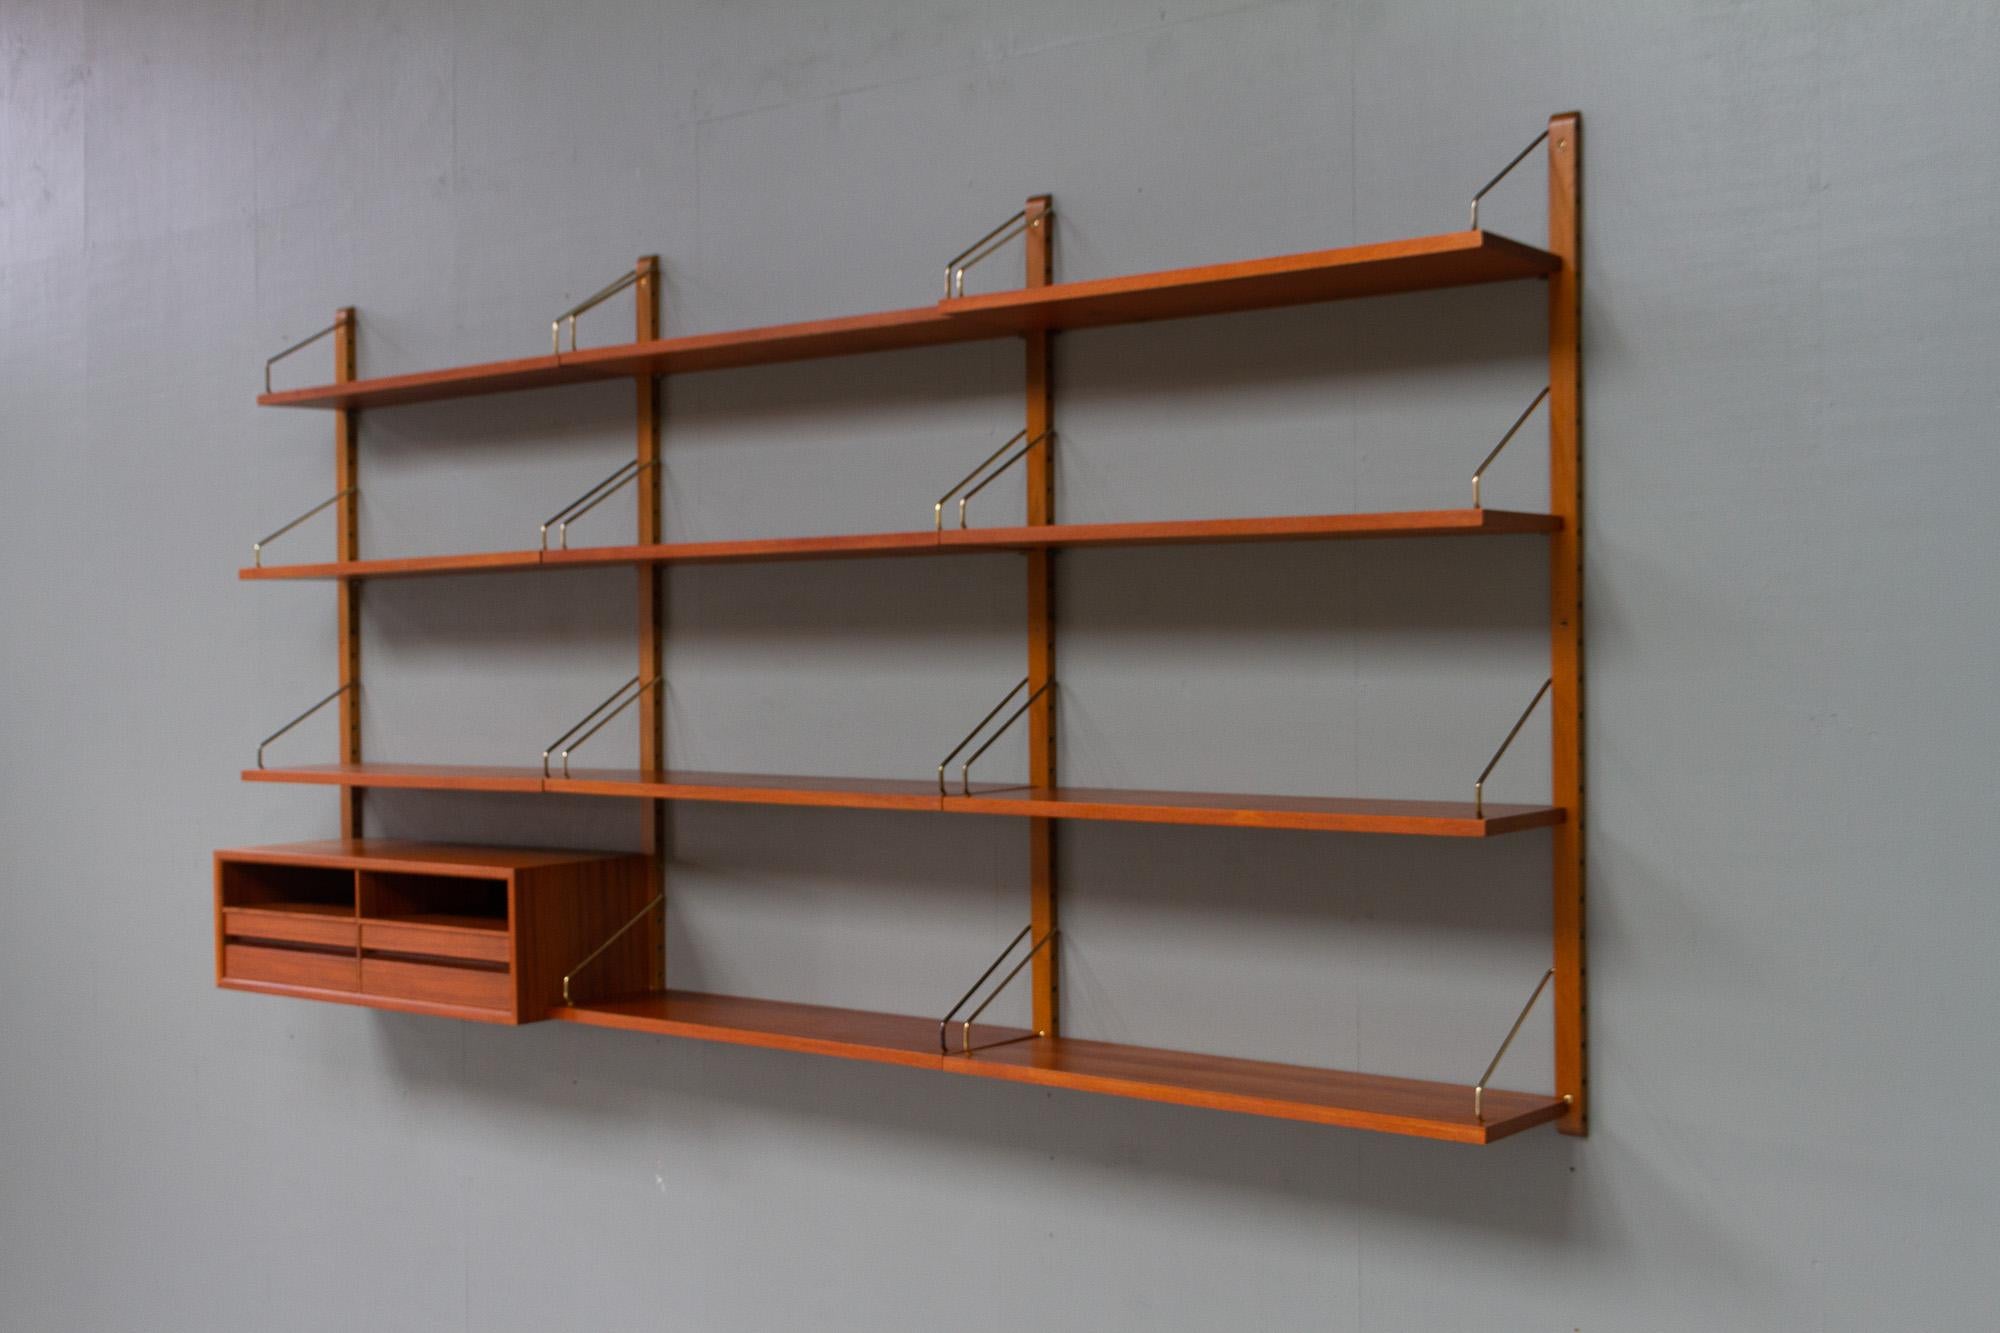 Vintage Danish teak wall unit by Poul Cadovius for Cado, 1950s.

Mid-Century Modern 3 bay shelving system model Royal. This is a original vintage floating bookcase designed in 1948 by Danish architect Poul Cadovius. 
Cadovius had the revolutionary